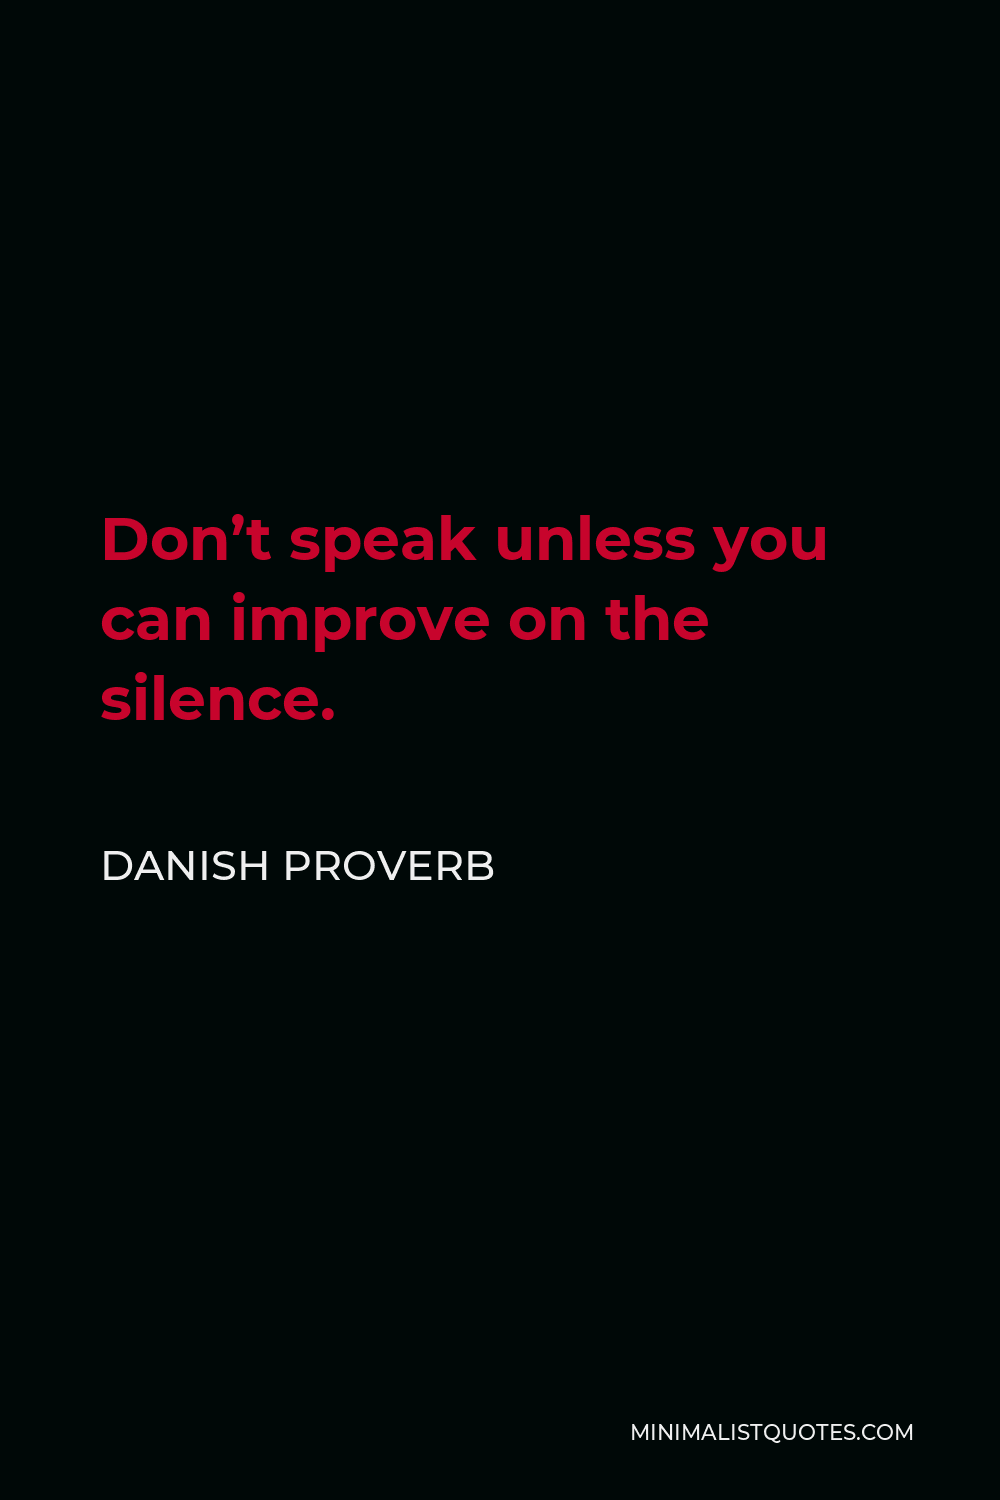 Danish Proverb Quote - Don’t speak unless you can improve on the silence.